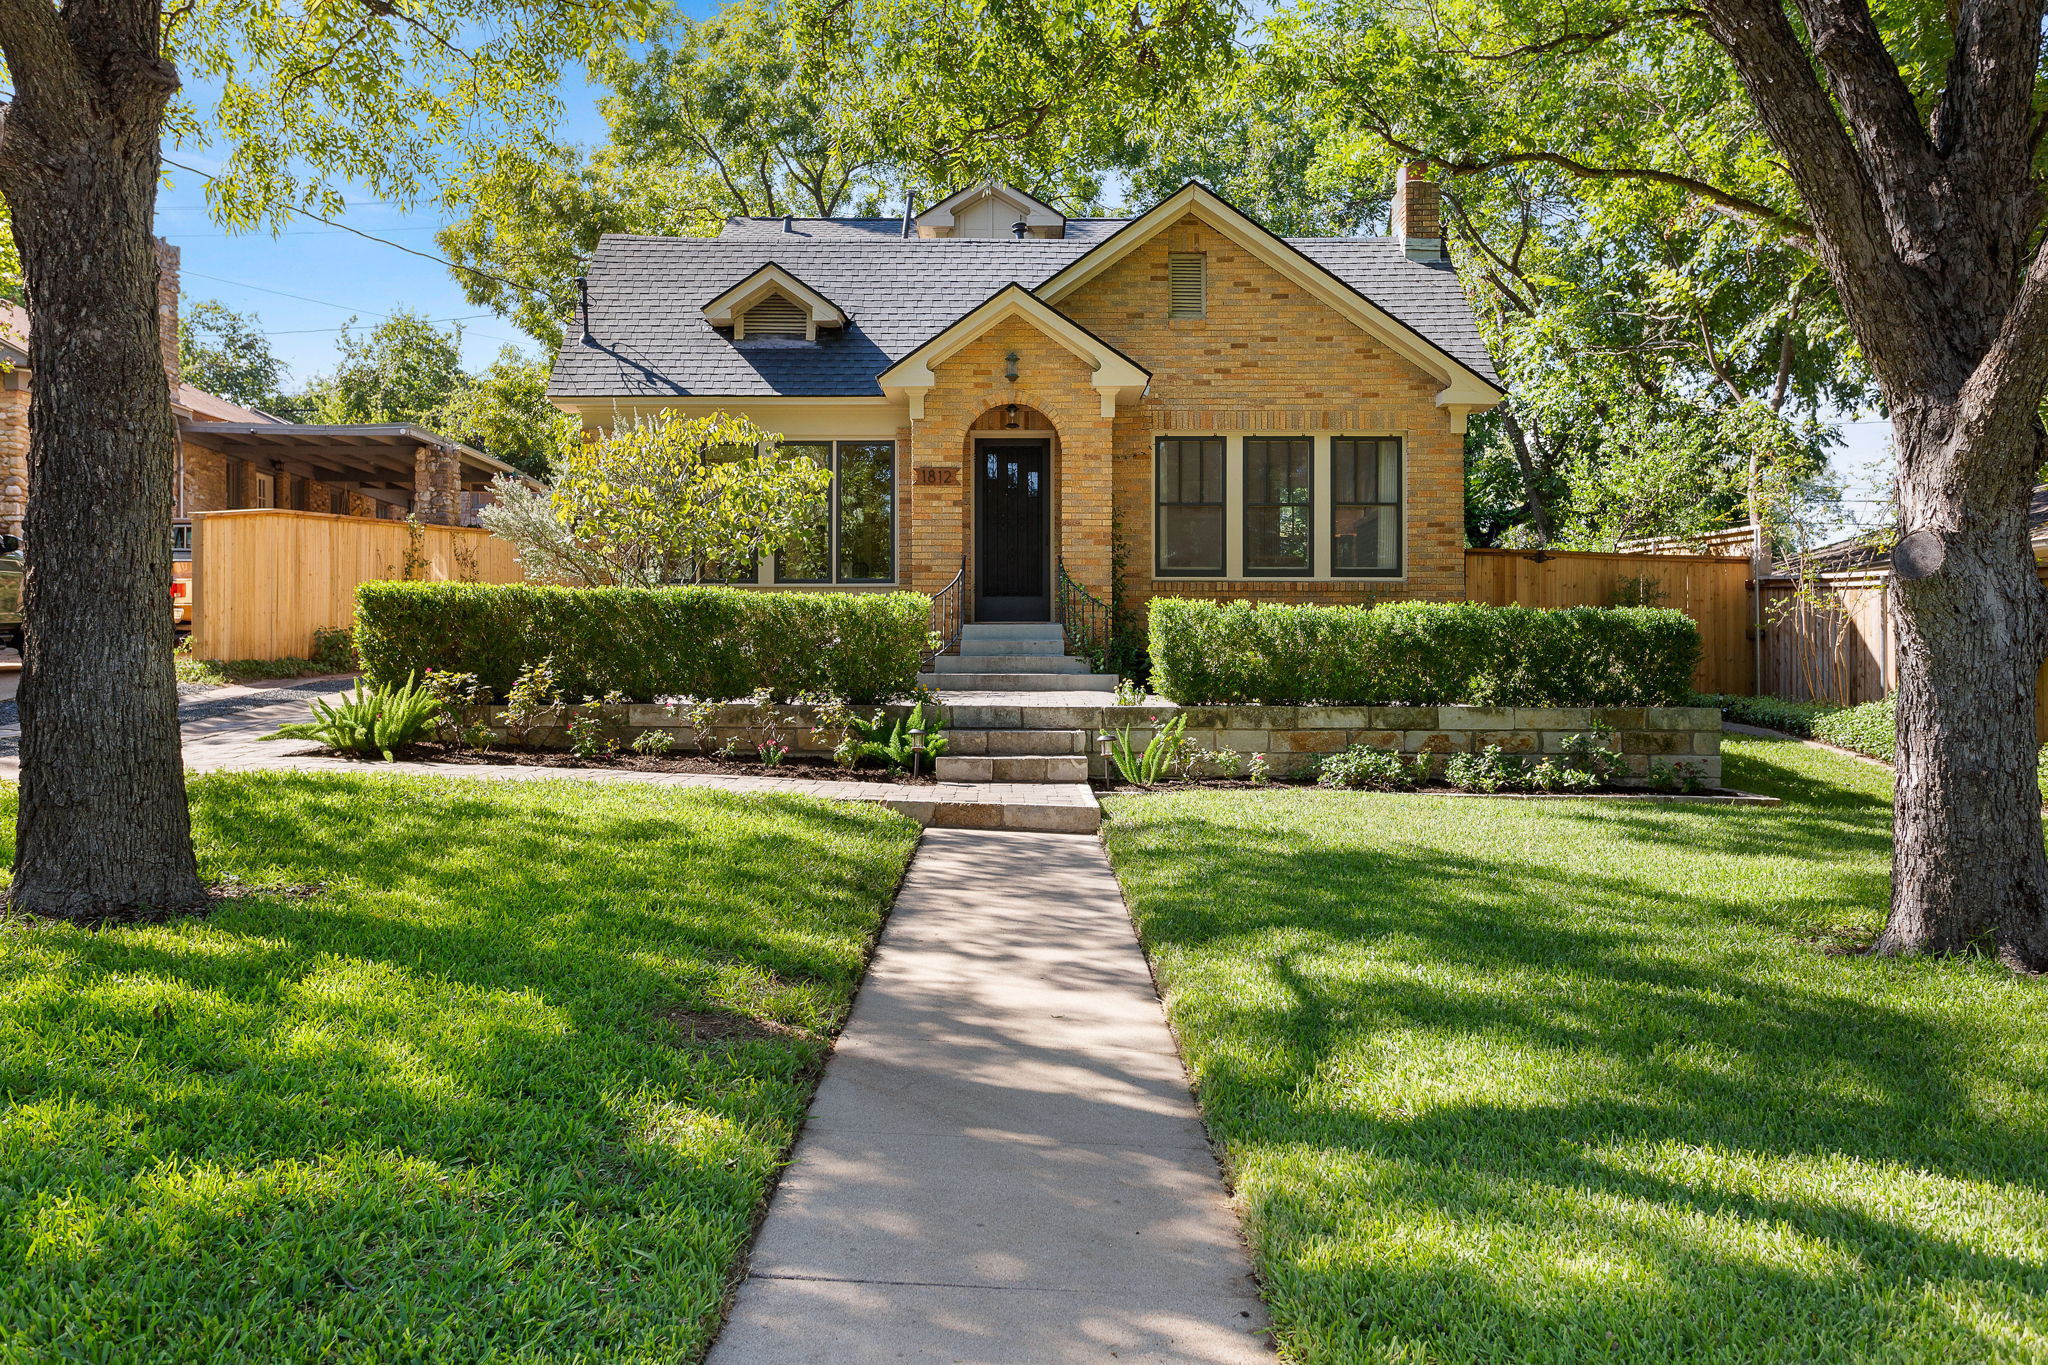 Welcome to 1812 Kenwood.  A 1930's cute in historic Travis Height Neighborhood